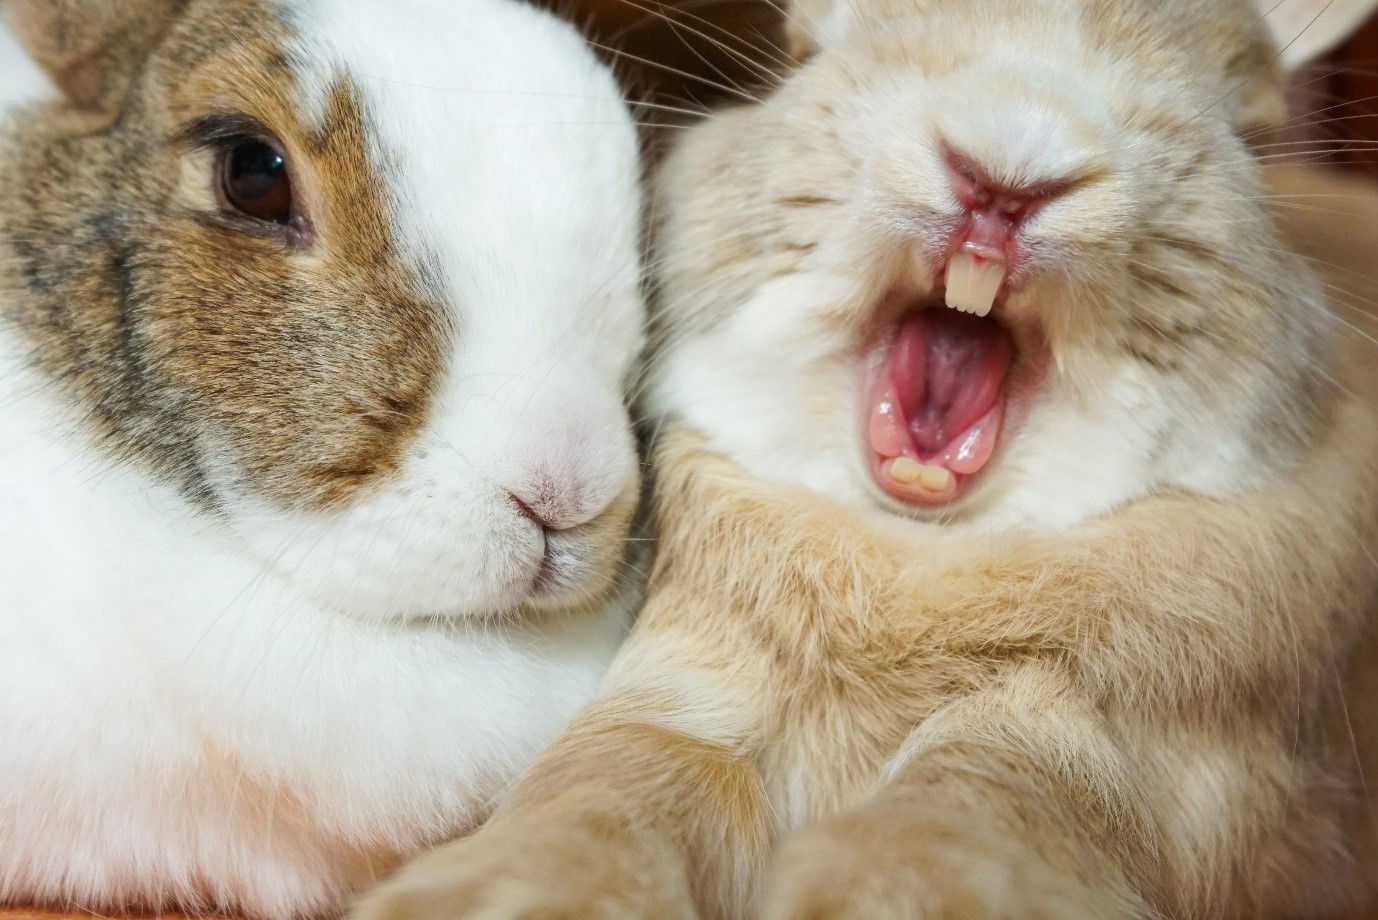 How to help prevent dental disease in rabbits